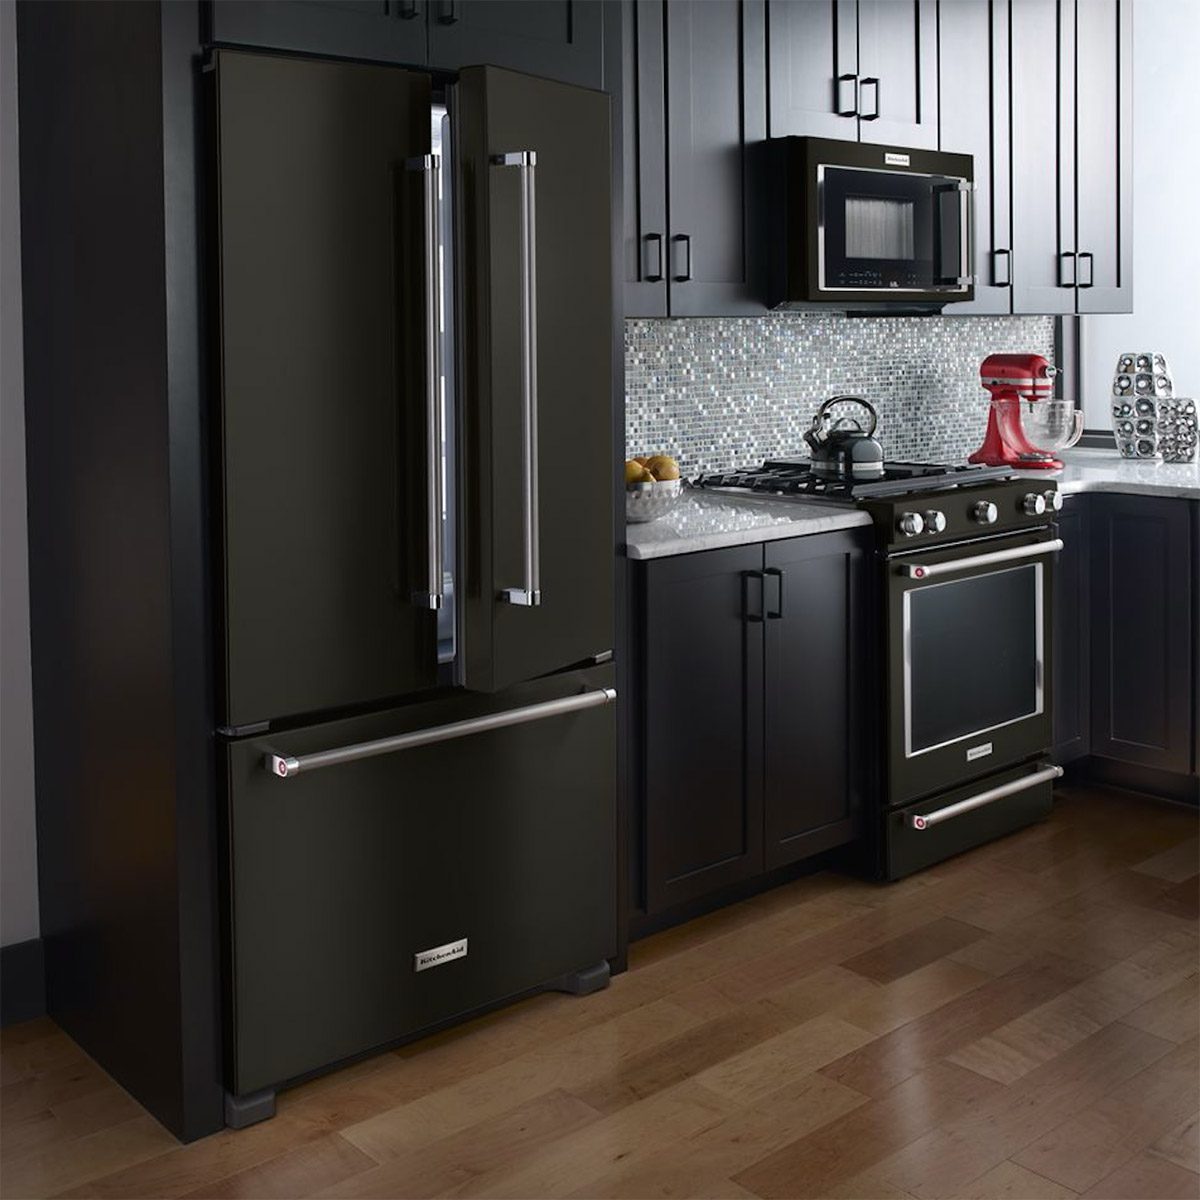 Home Trend Black Stainless Steel Appliances — The Family Handyman